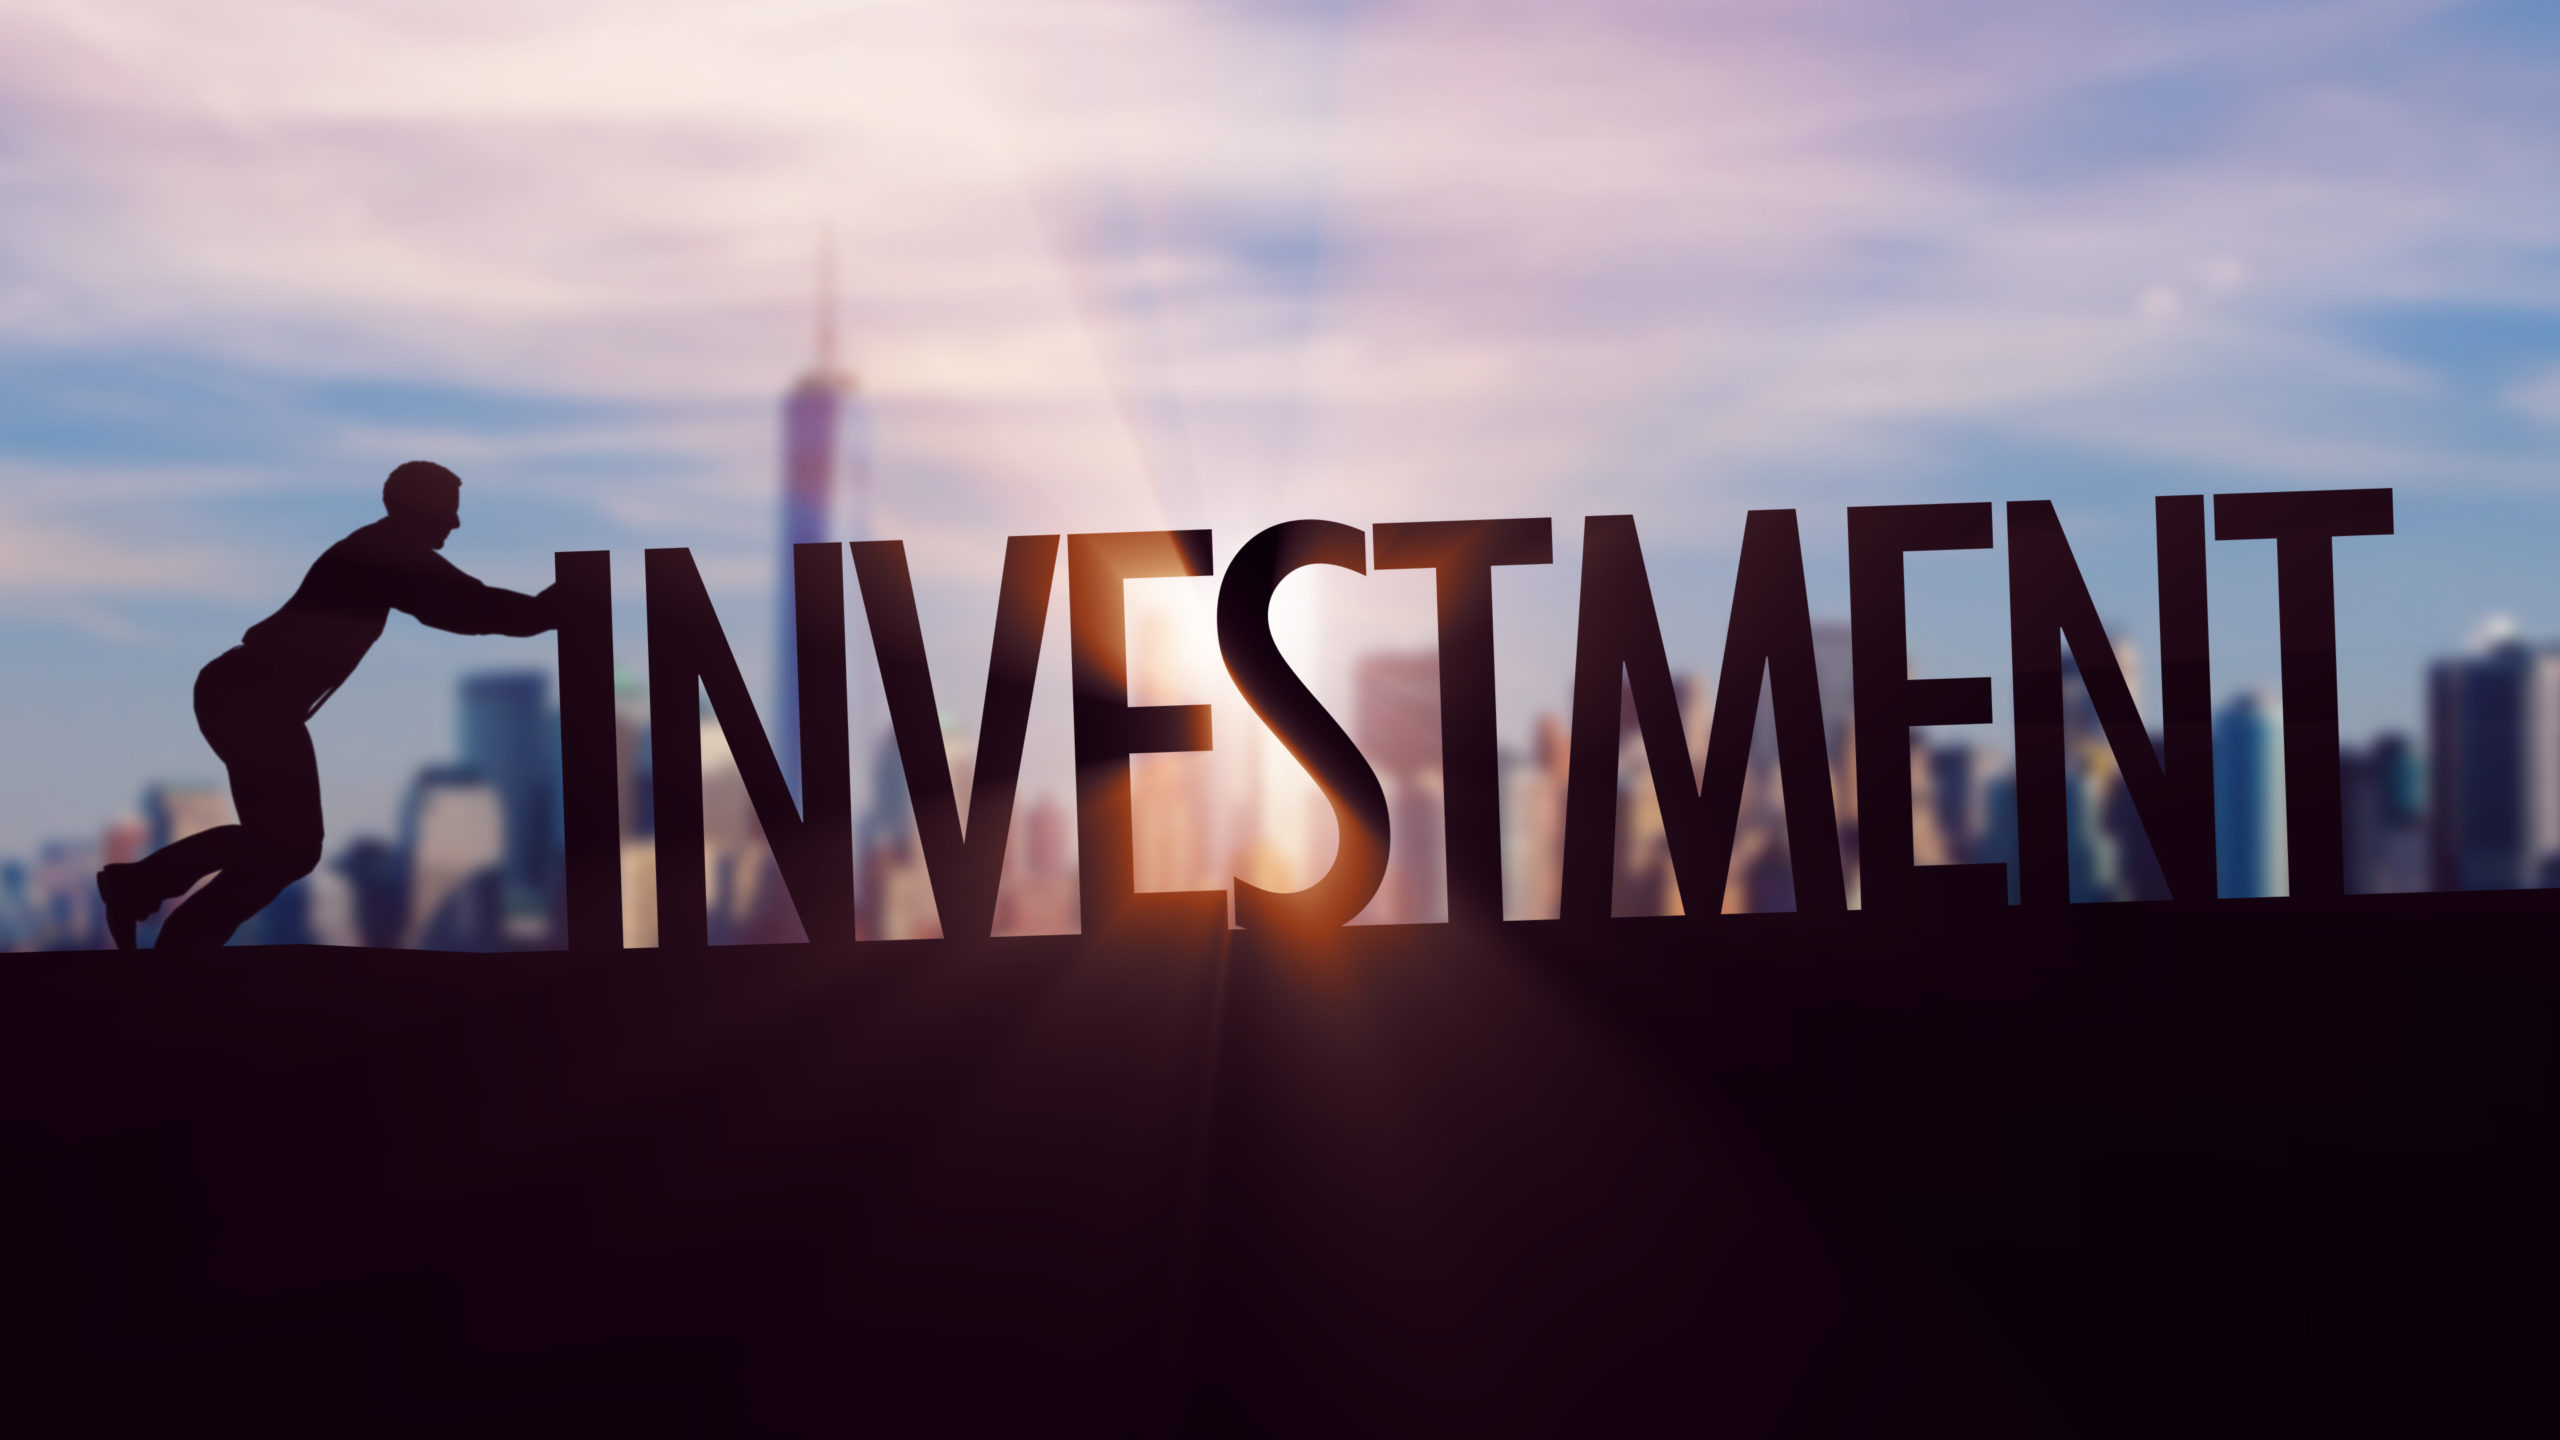 Investment - Businessman silhouette pushing thematic title